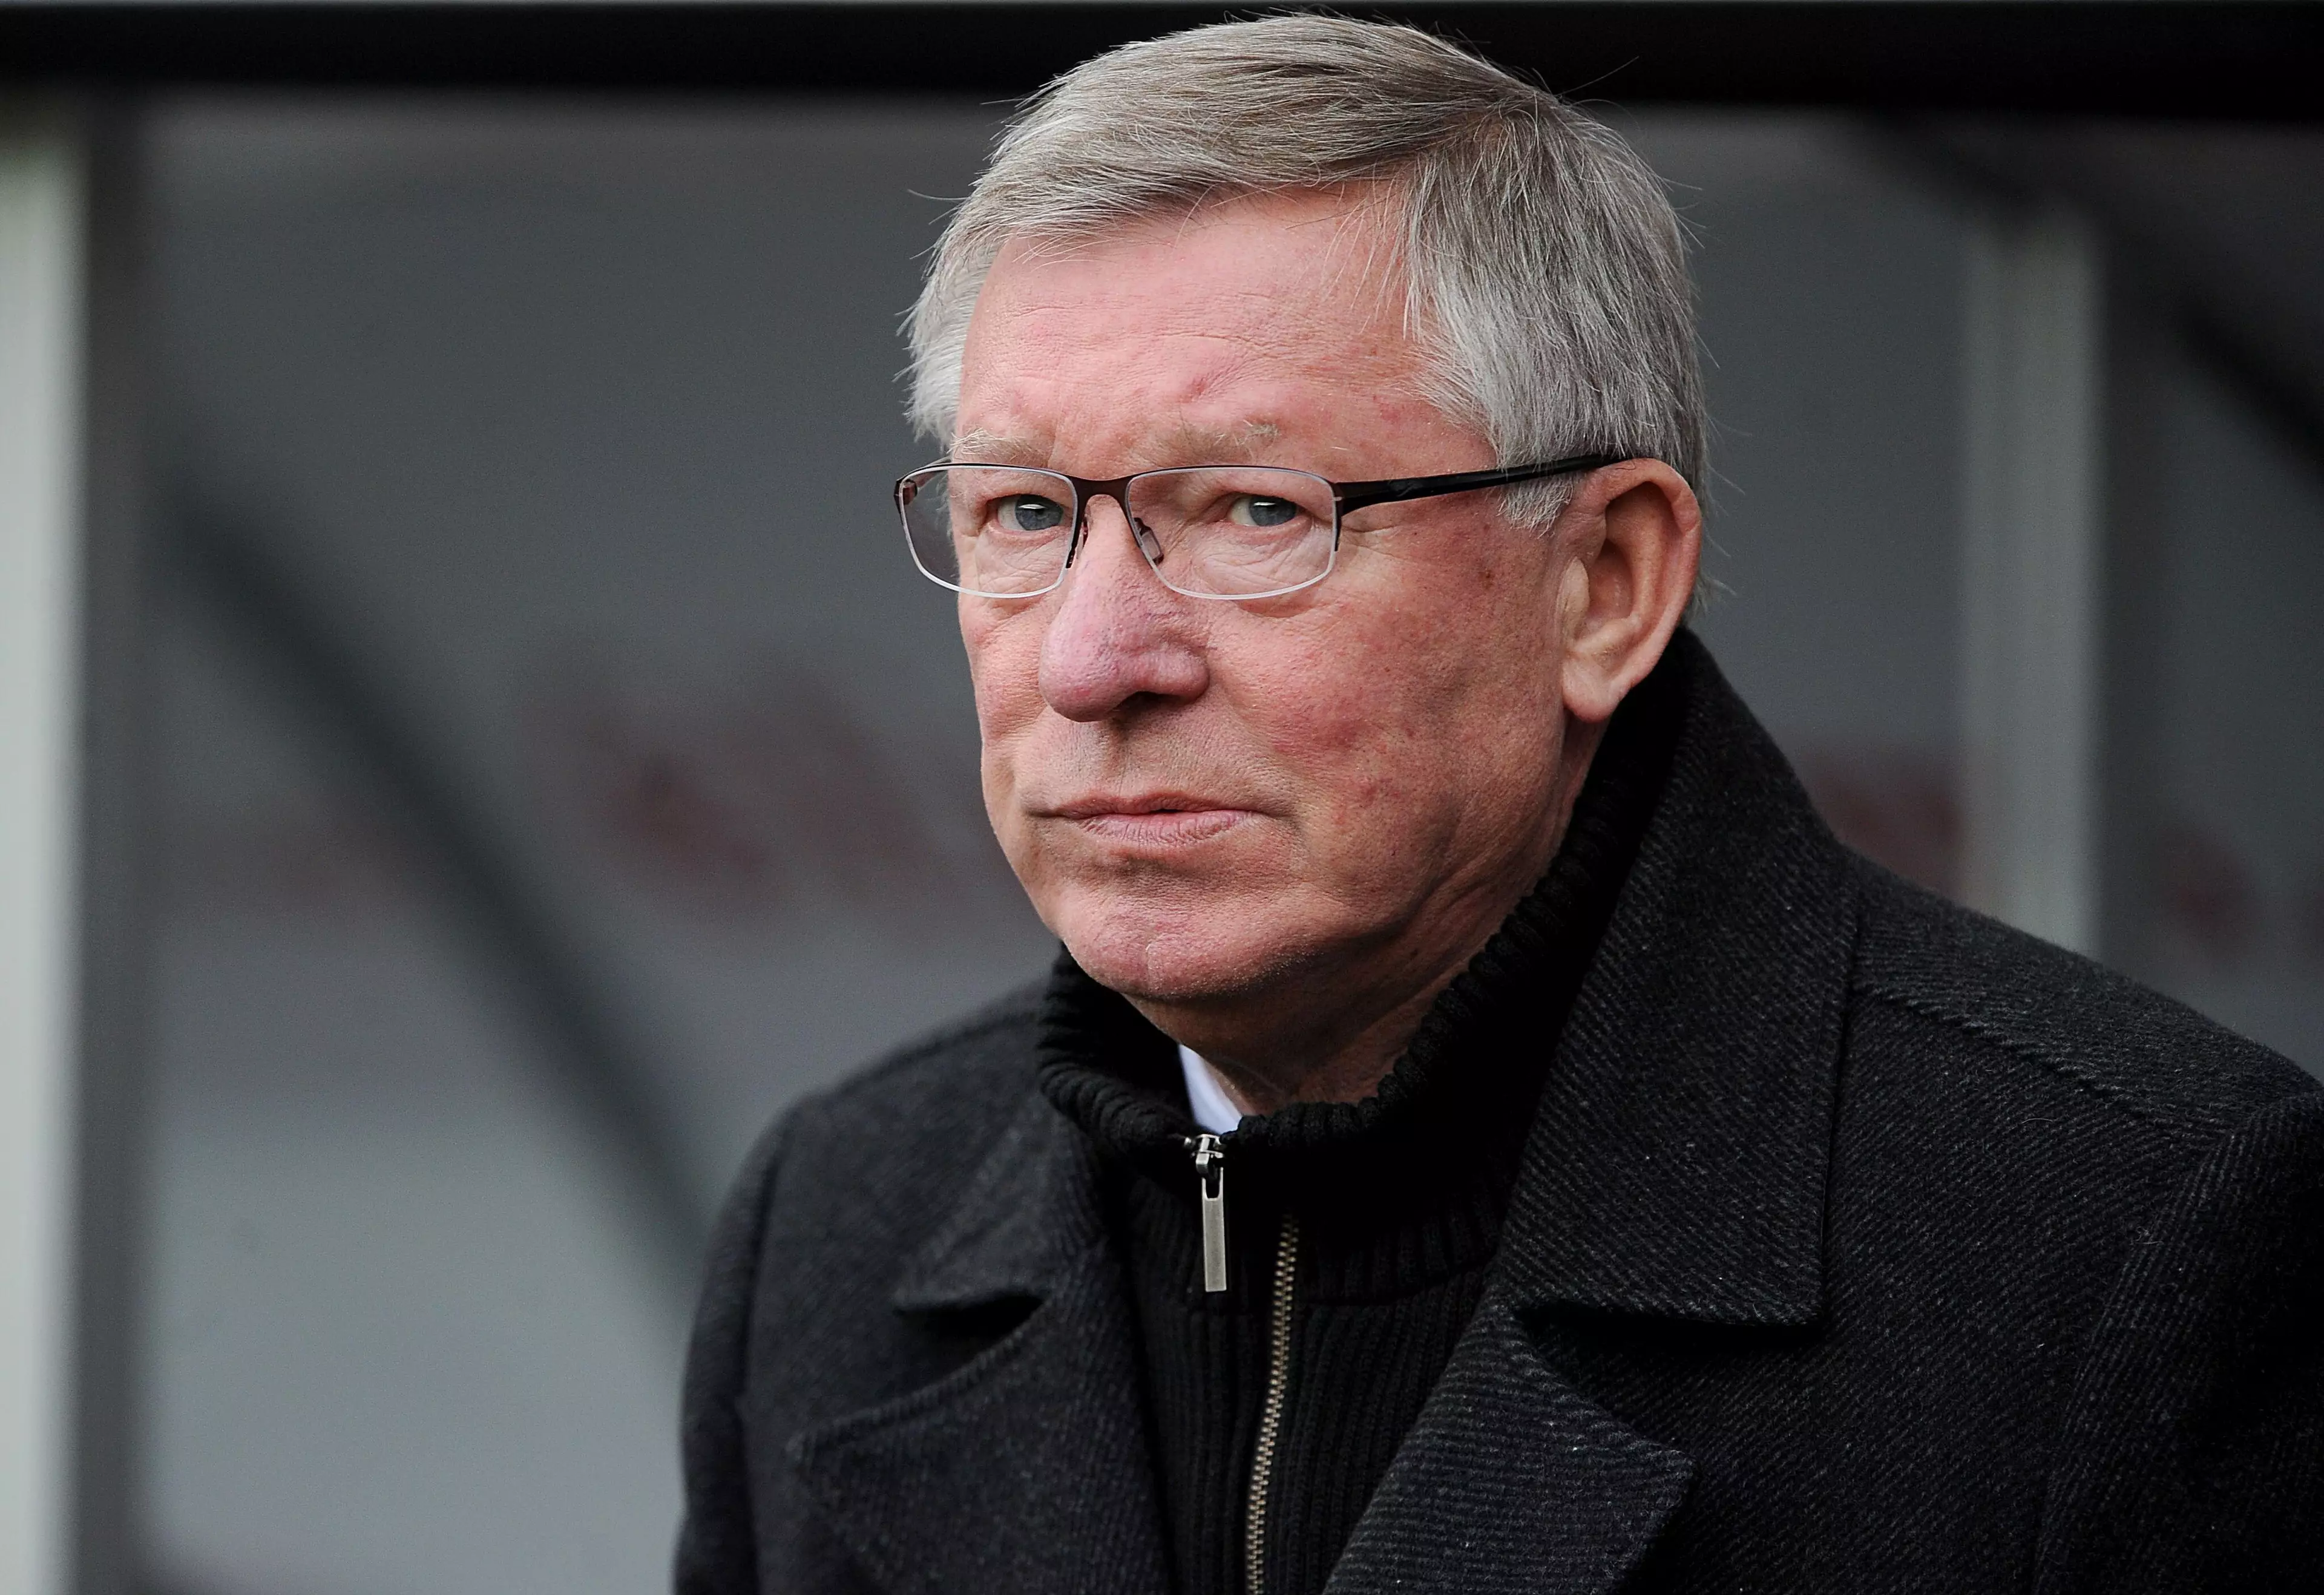 Sir Alex Ferguson would describe the result as his 'worst ever day' in football (Image: PA)